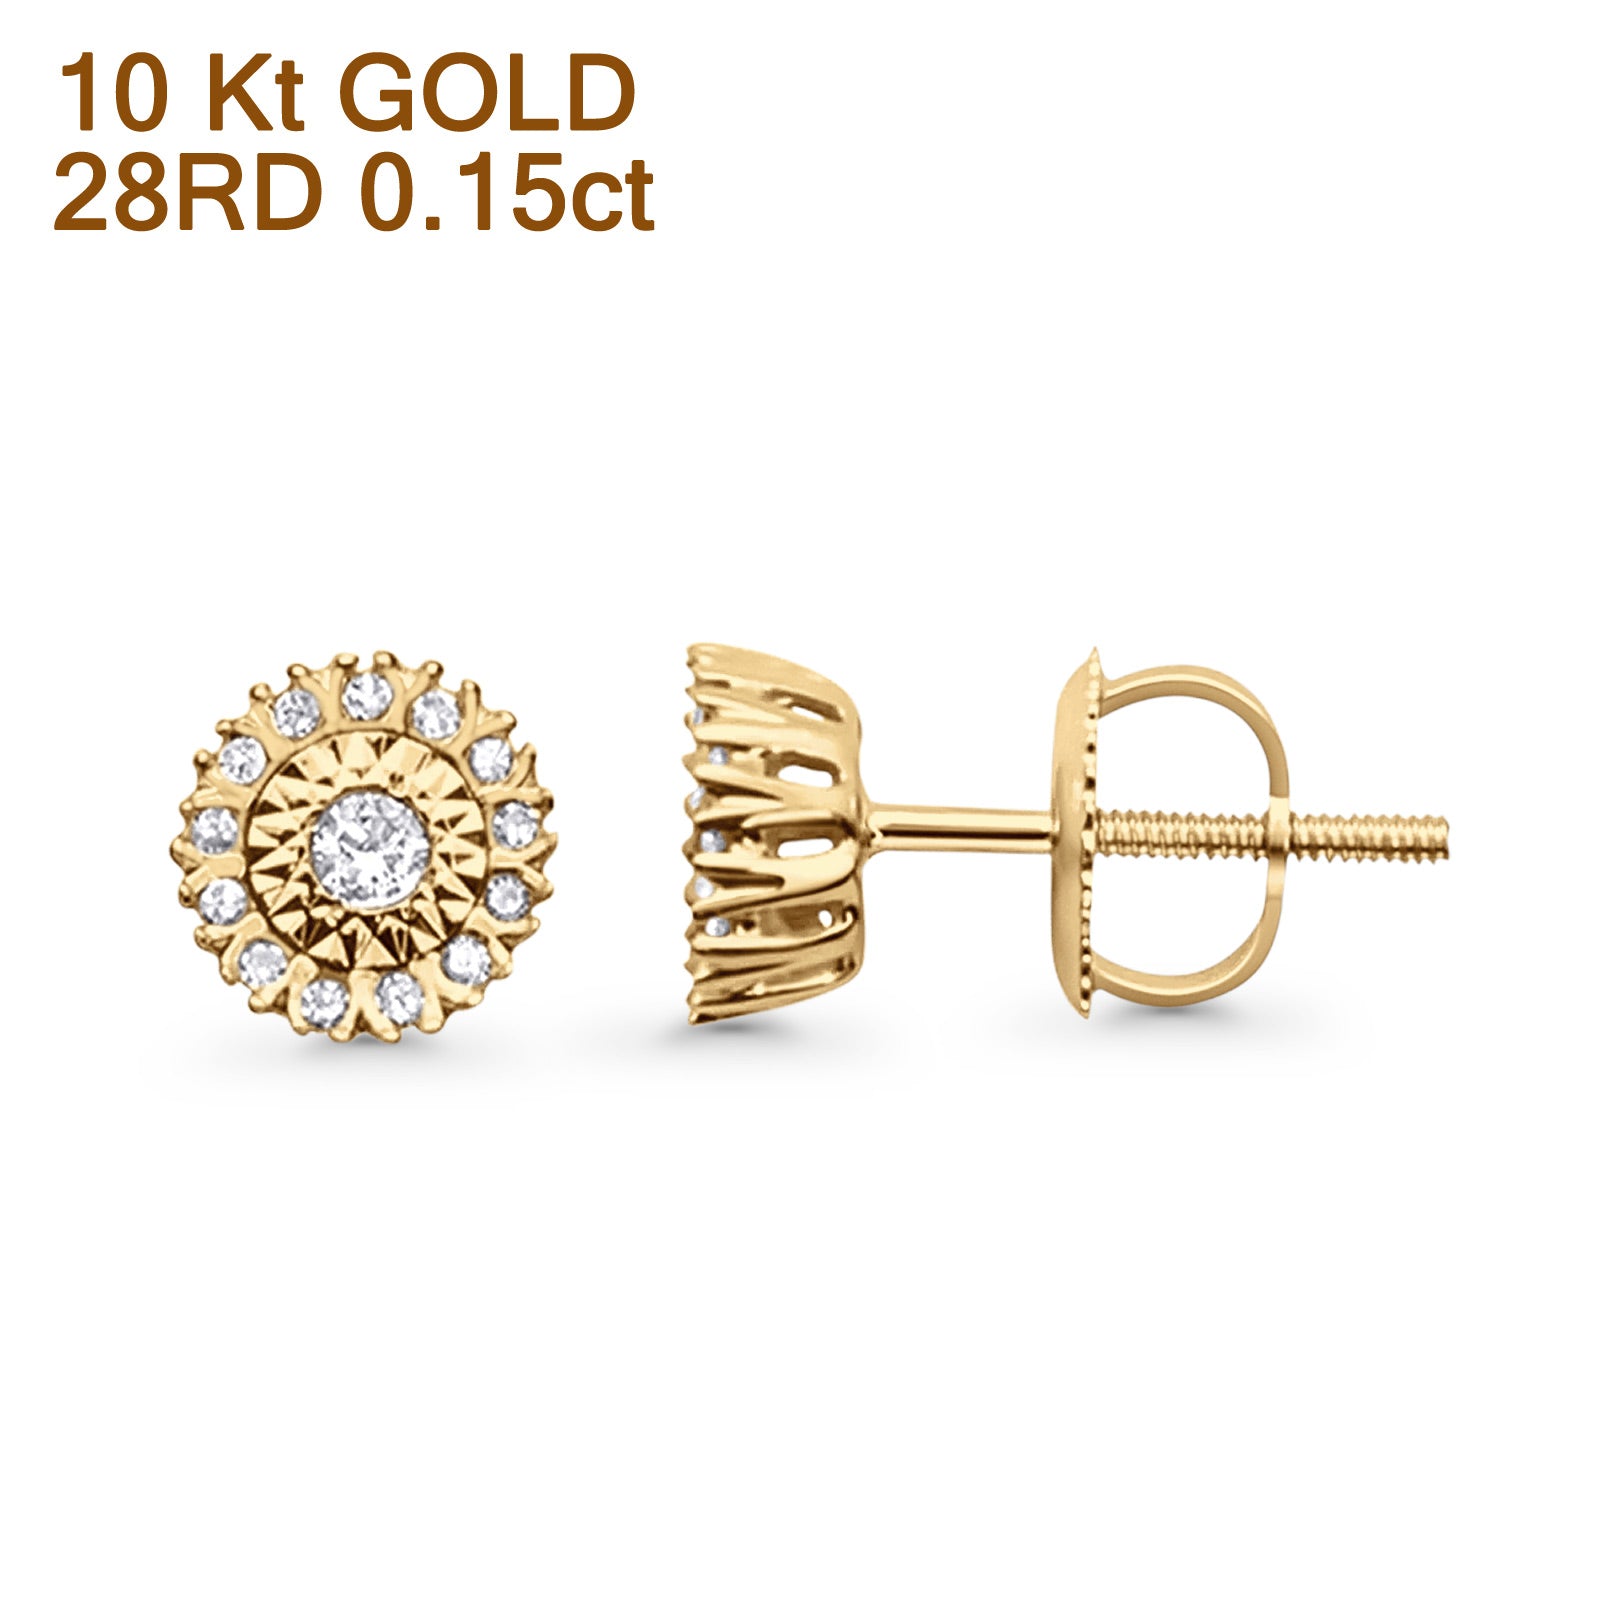 Solid 10K Gold 5mm Flower Design Solitaire Round Diamond Stud Earring